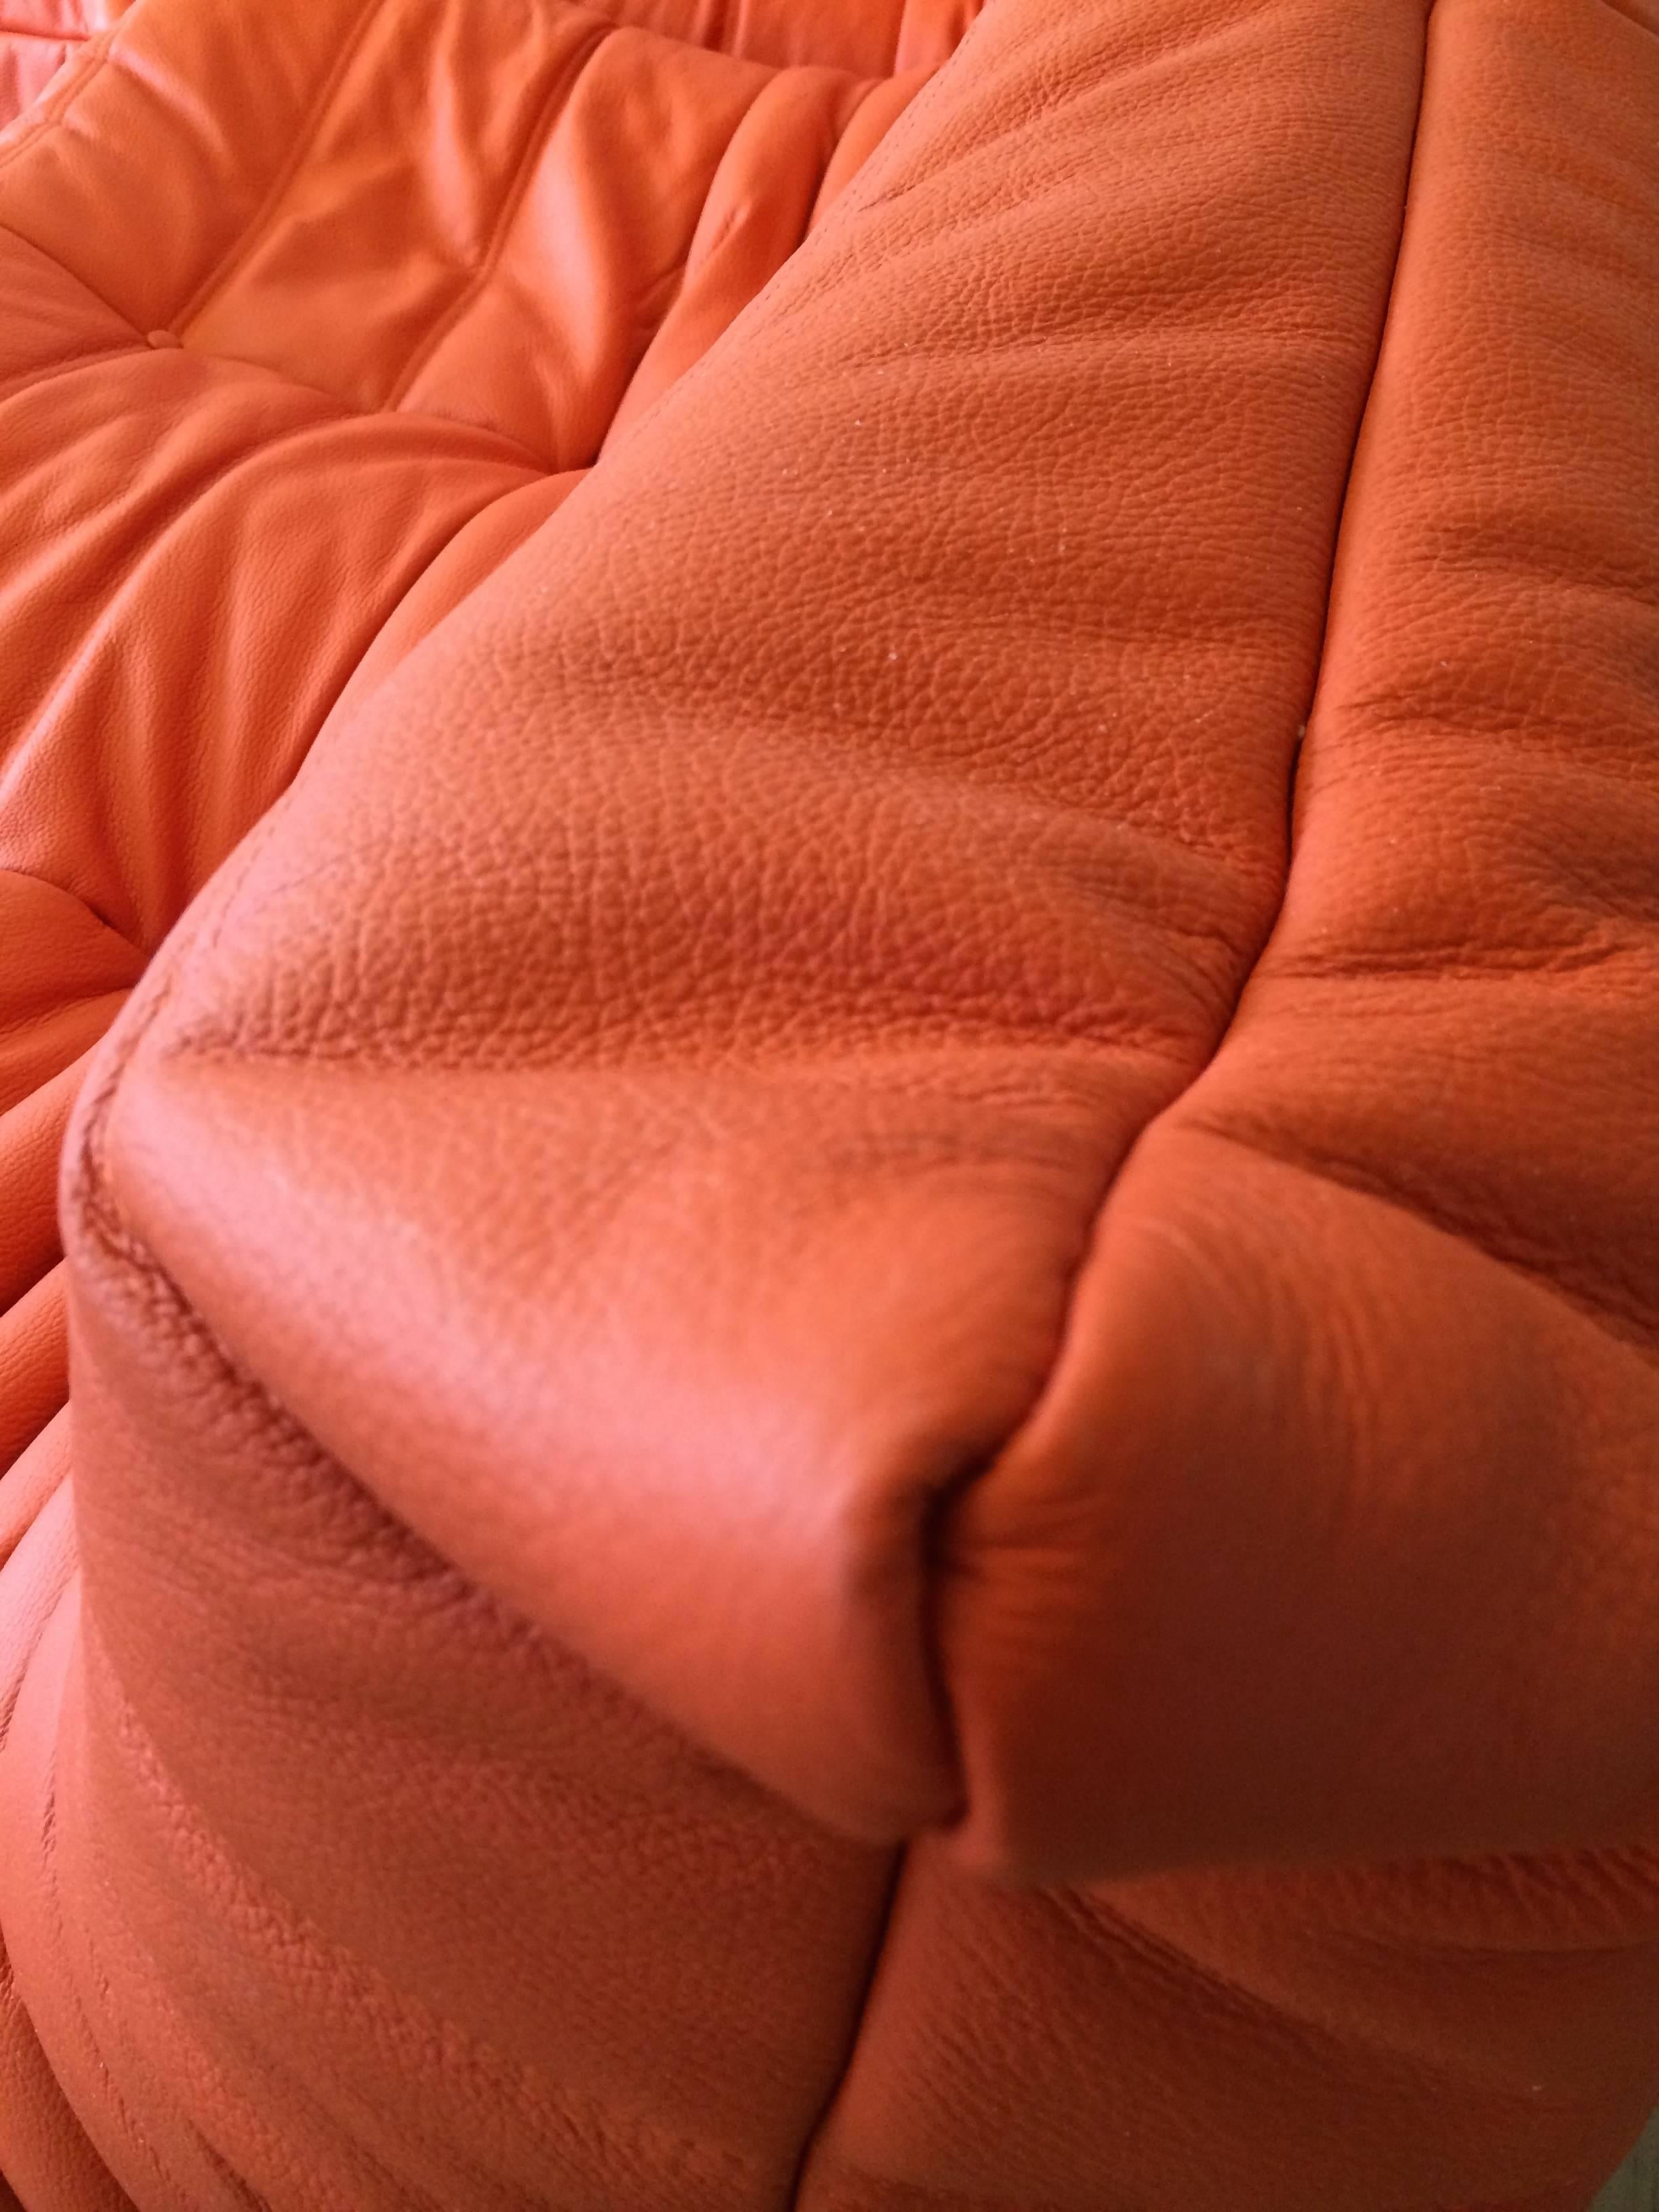 Late 20th Century Orange Leather Two-Seat Togo Sofa by Michel Ducaroy for Ligne Roset For Sale